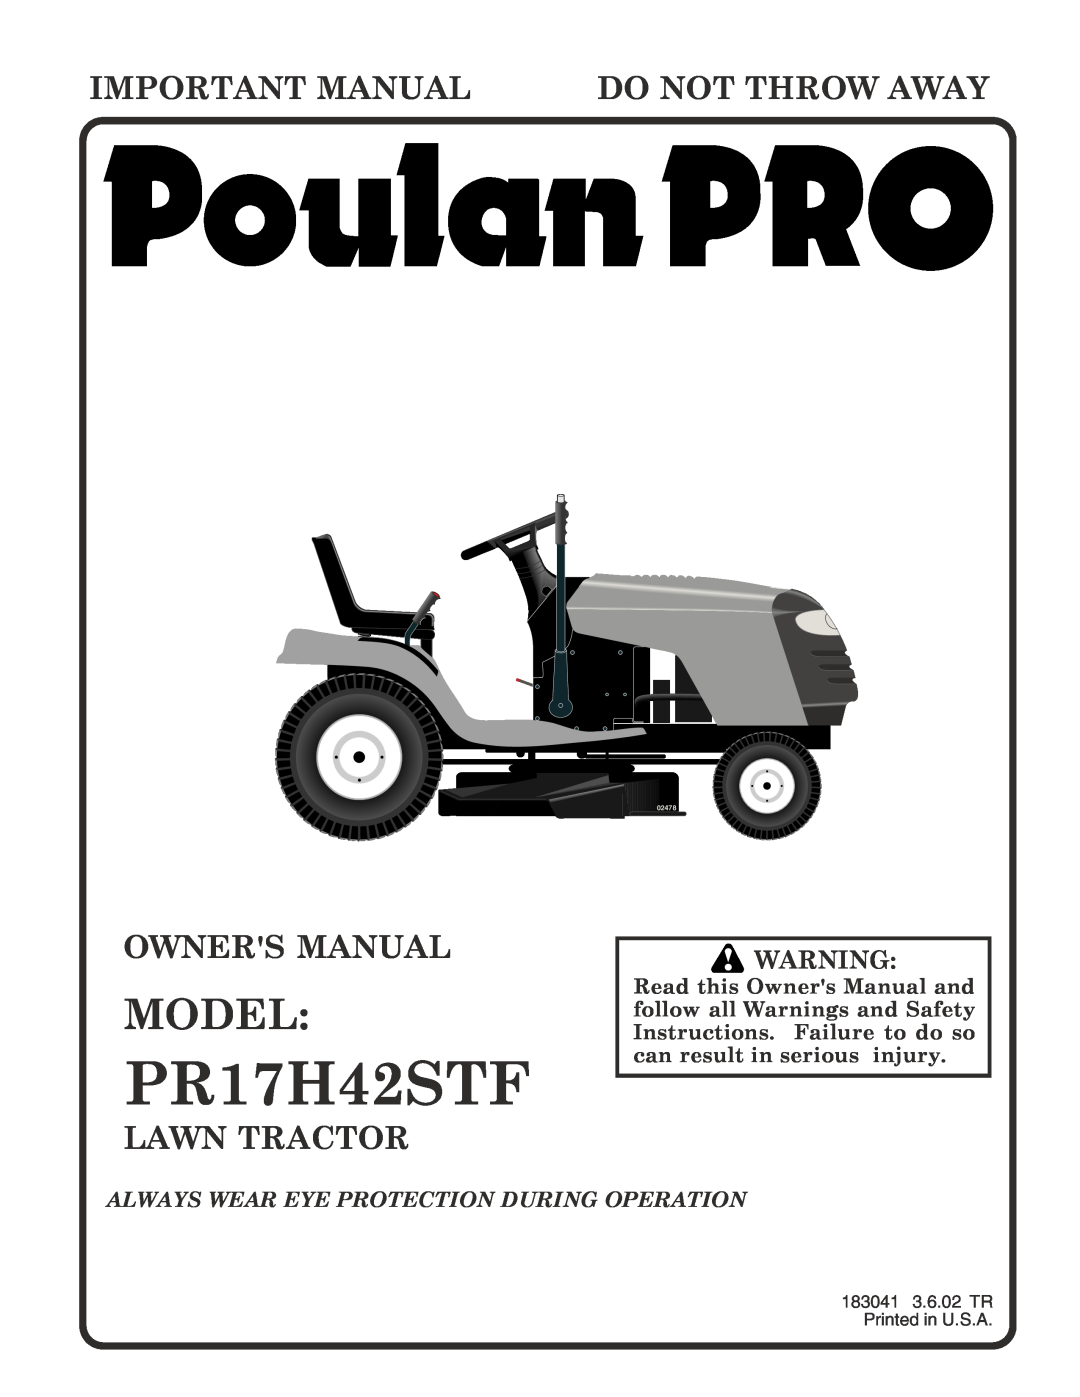 Poulan PR17H42STF owner manual Model, Important Manual, Do Not Throw Away, Lawn Tractor, 02478 